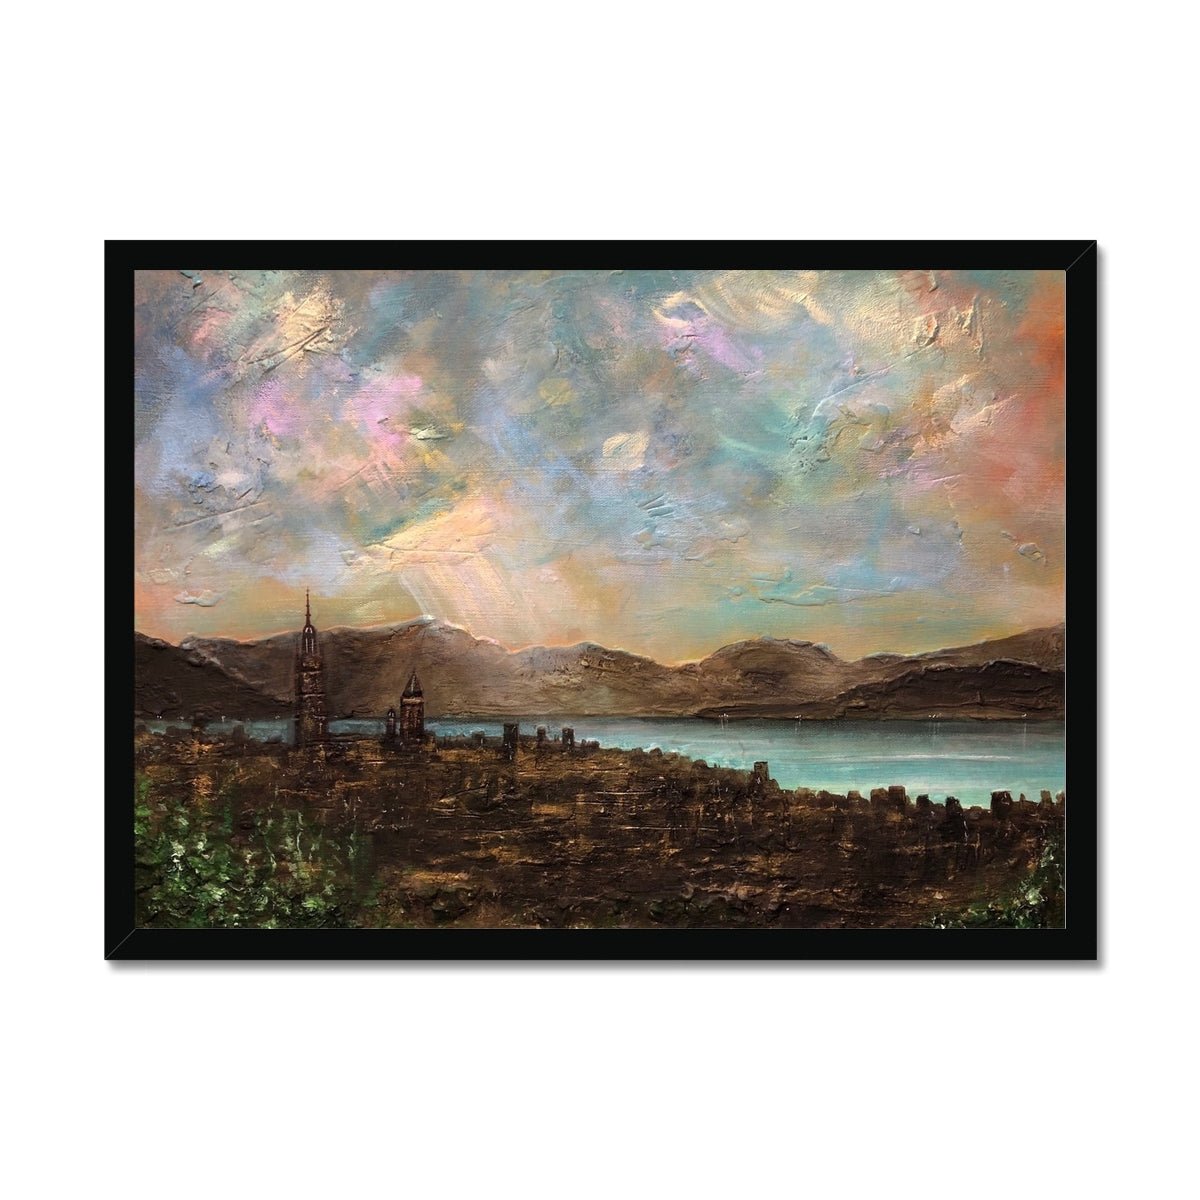 Angels Fingers Over Greenock Painting | Framed Prints From Scotland-Framed Prints-River Clyde Art Gallery-A2 Landscape-Black Frame-Paintings, Prints, Homeware, Art Gifts From Scotland By Scottish Artist Kevin Hunter